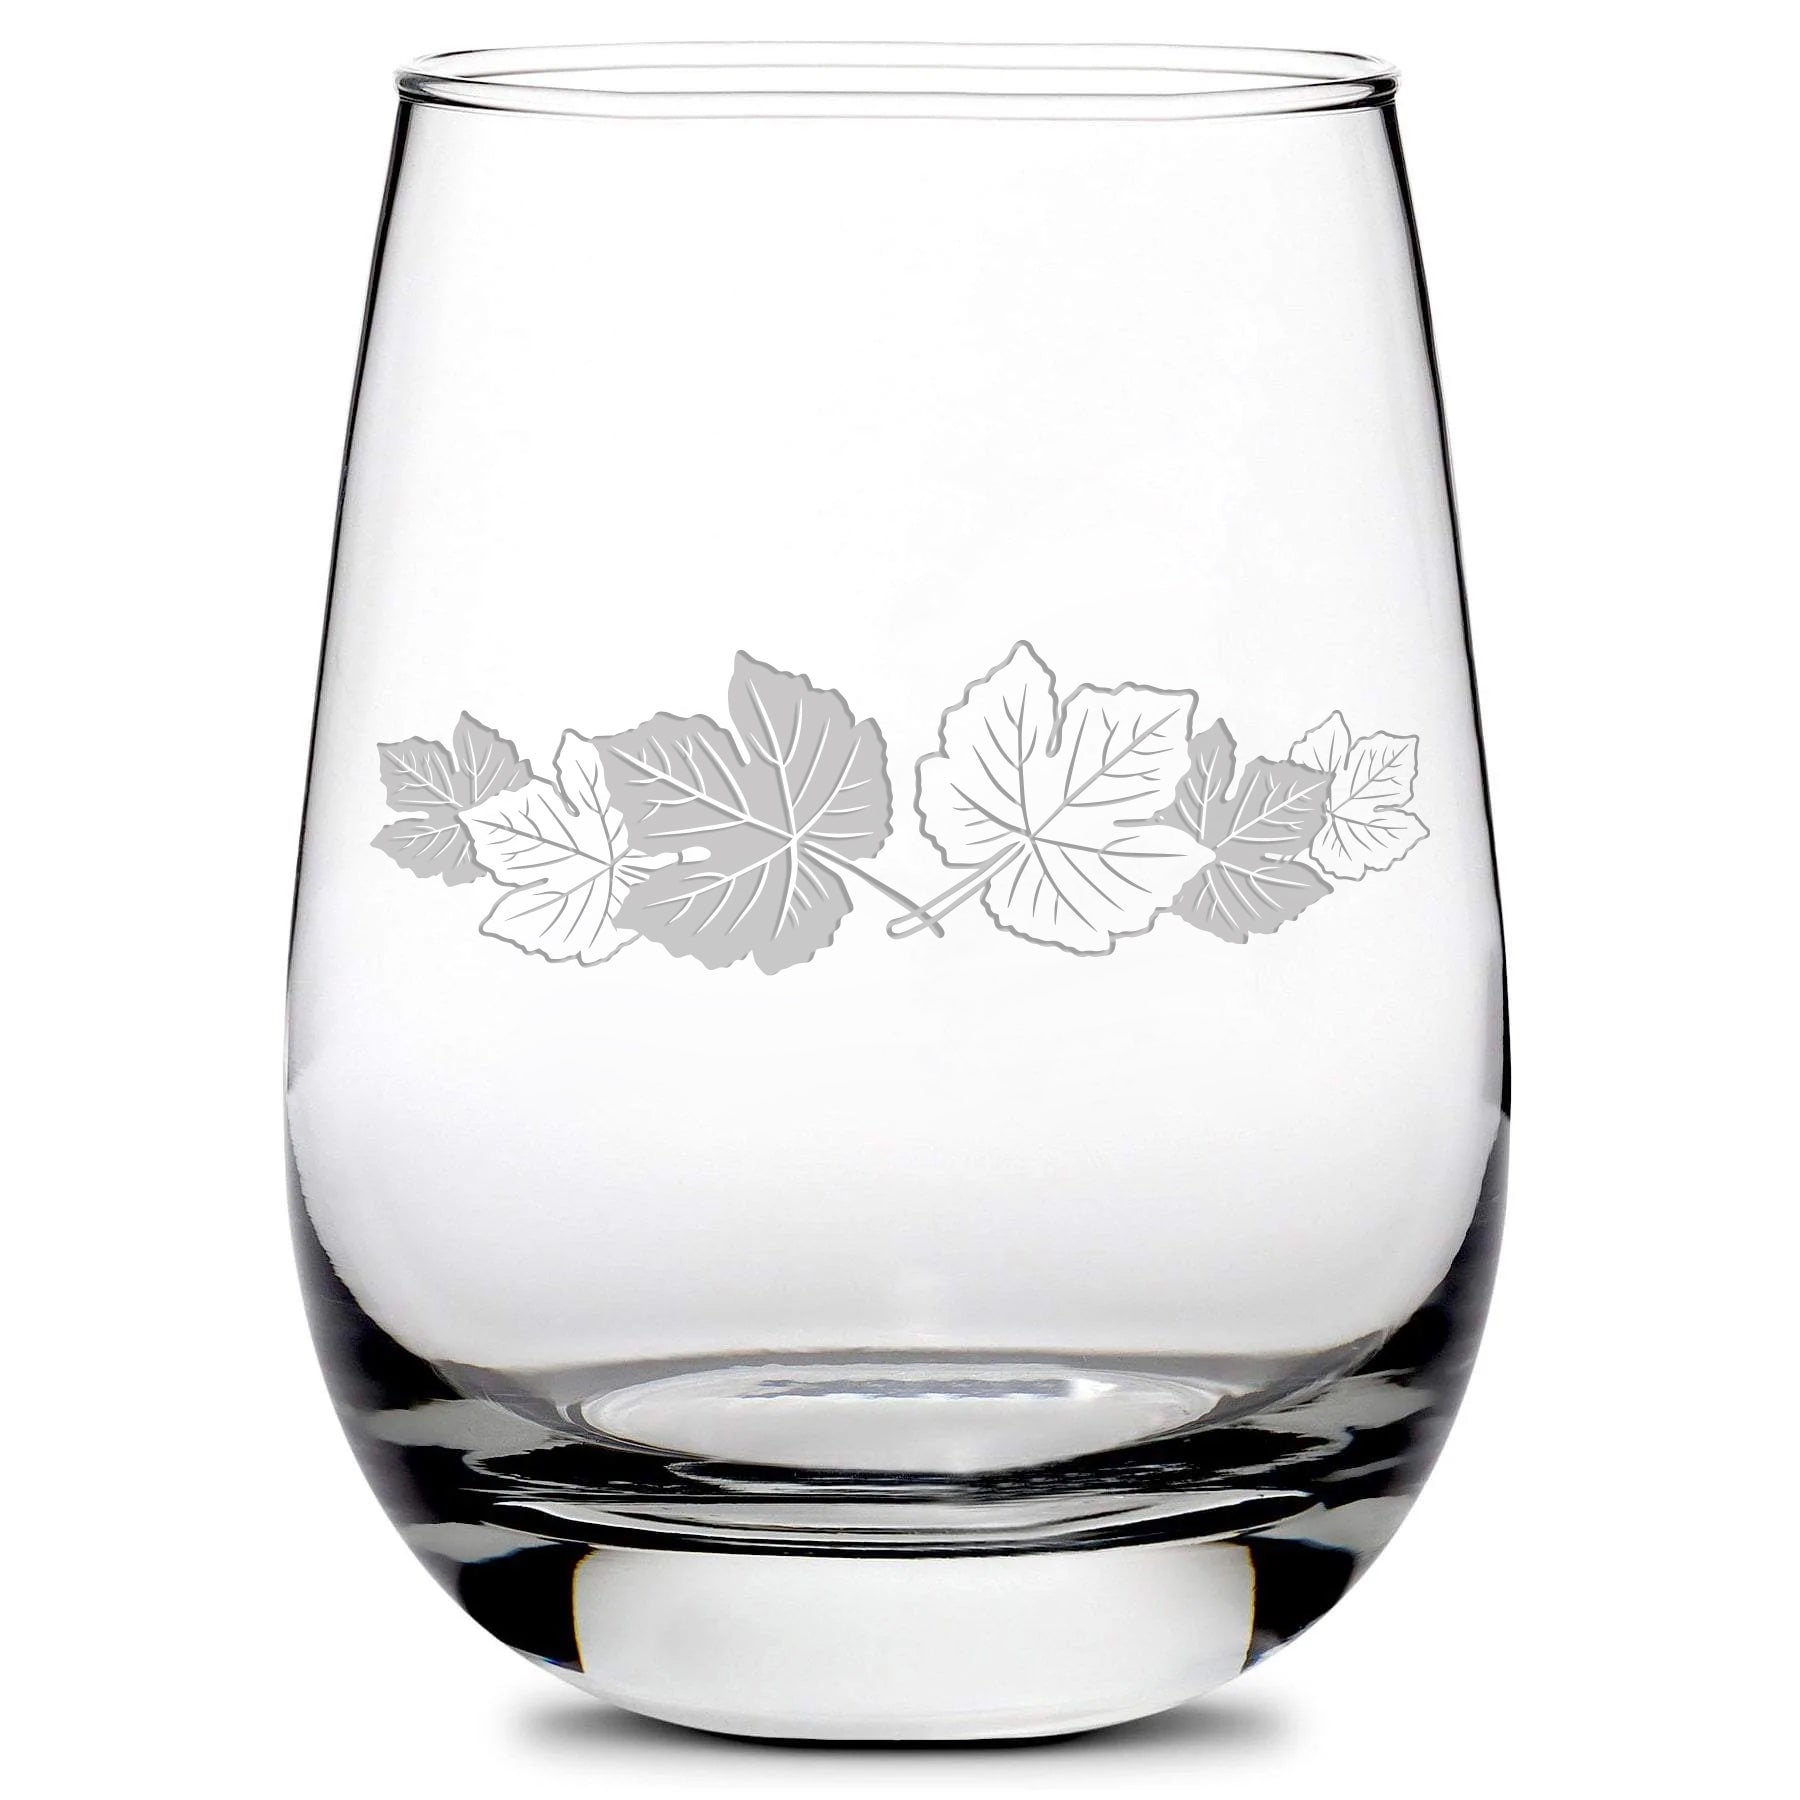 Premium Stemless Wine Glass, Group of Grape Leaves, Hand Etched, Made in USA, 16oz